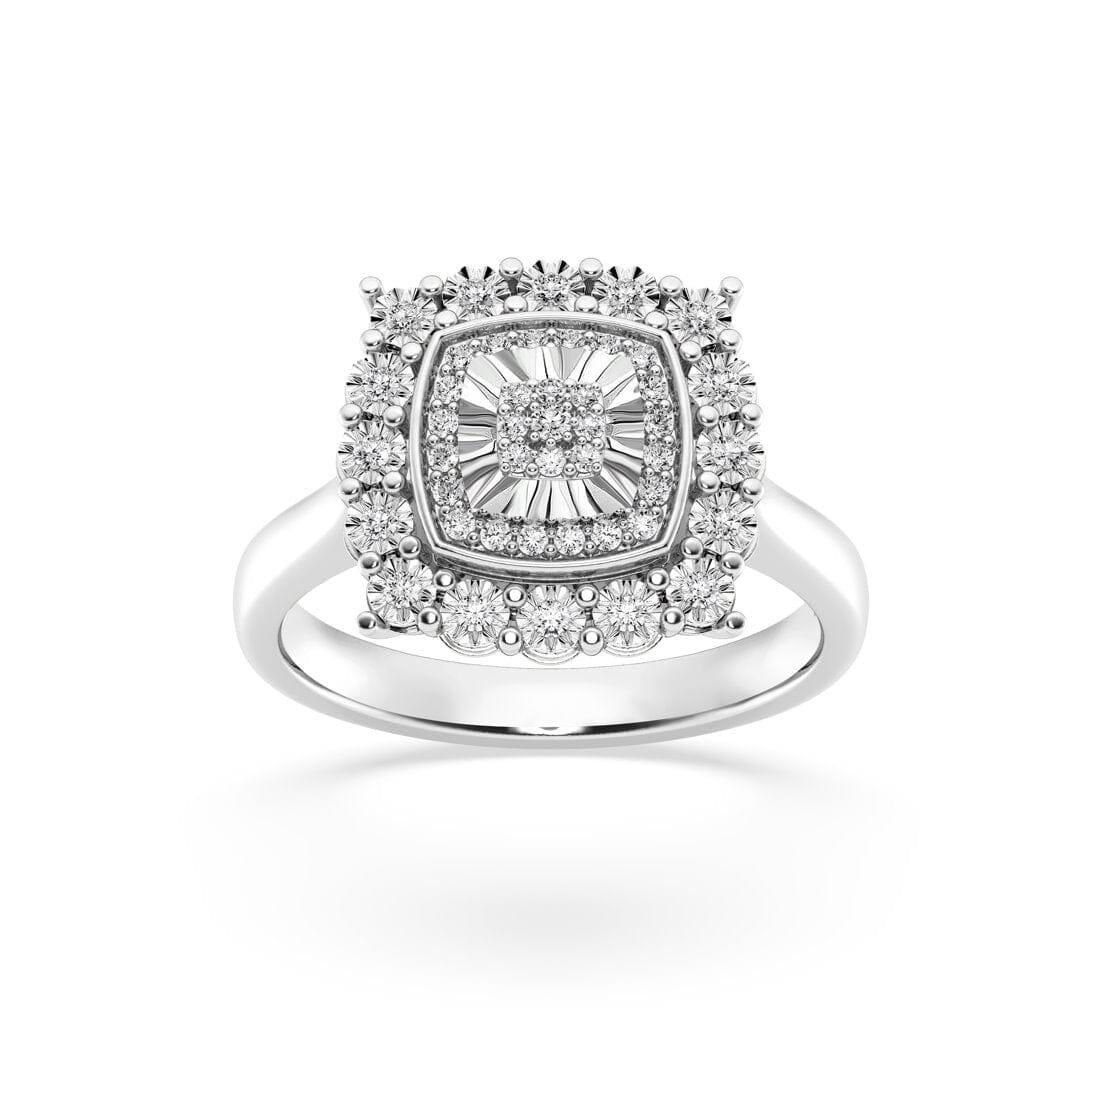 Cushion Shape Halo Ring with 0.15ct of Diamonds in Sterling Silver Rings Bevilles 